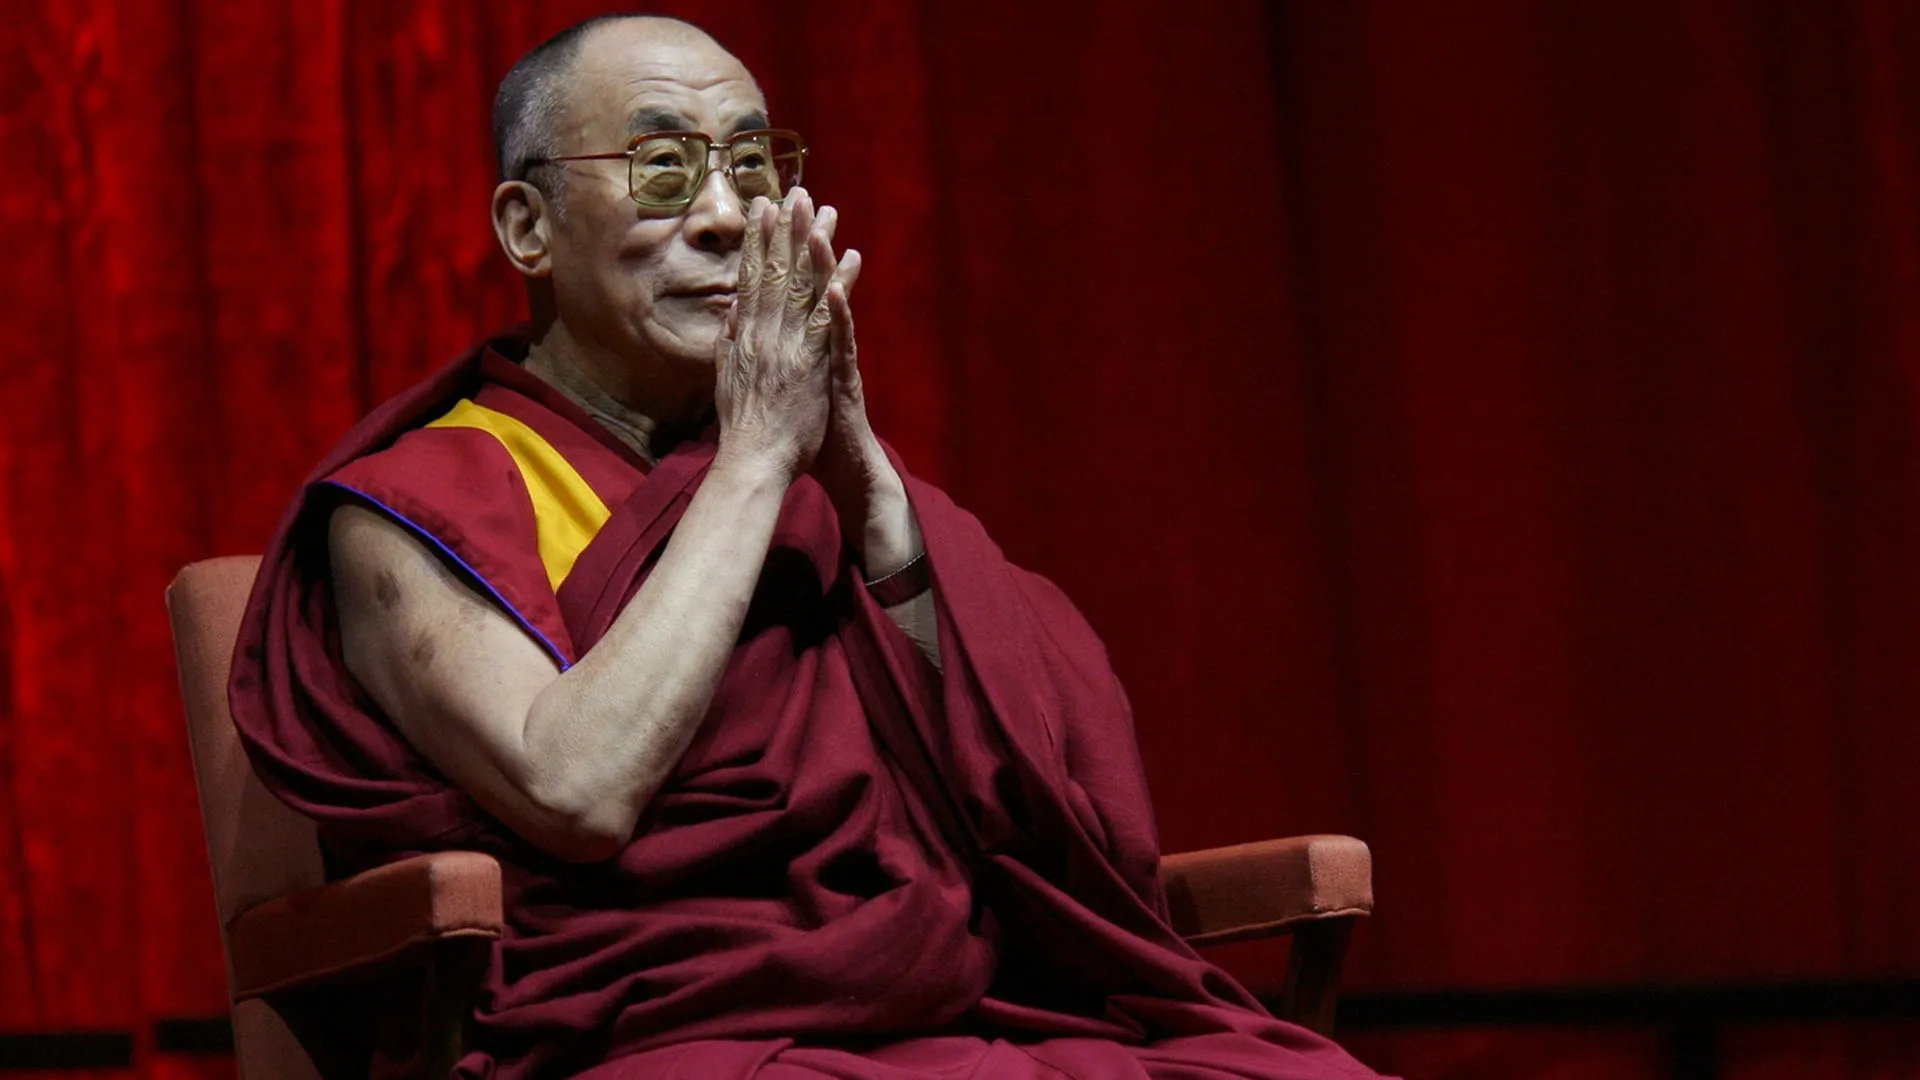 Dalai Lama: Has often been described as a "living Buddha" or a "bodhisattva". 1920x1080 Full HD Background.